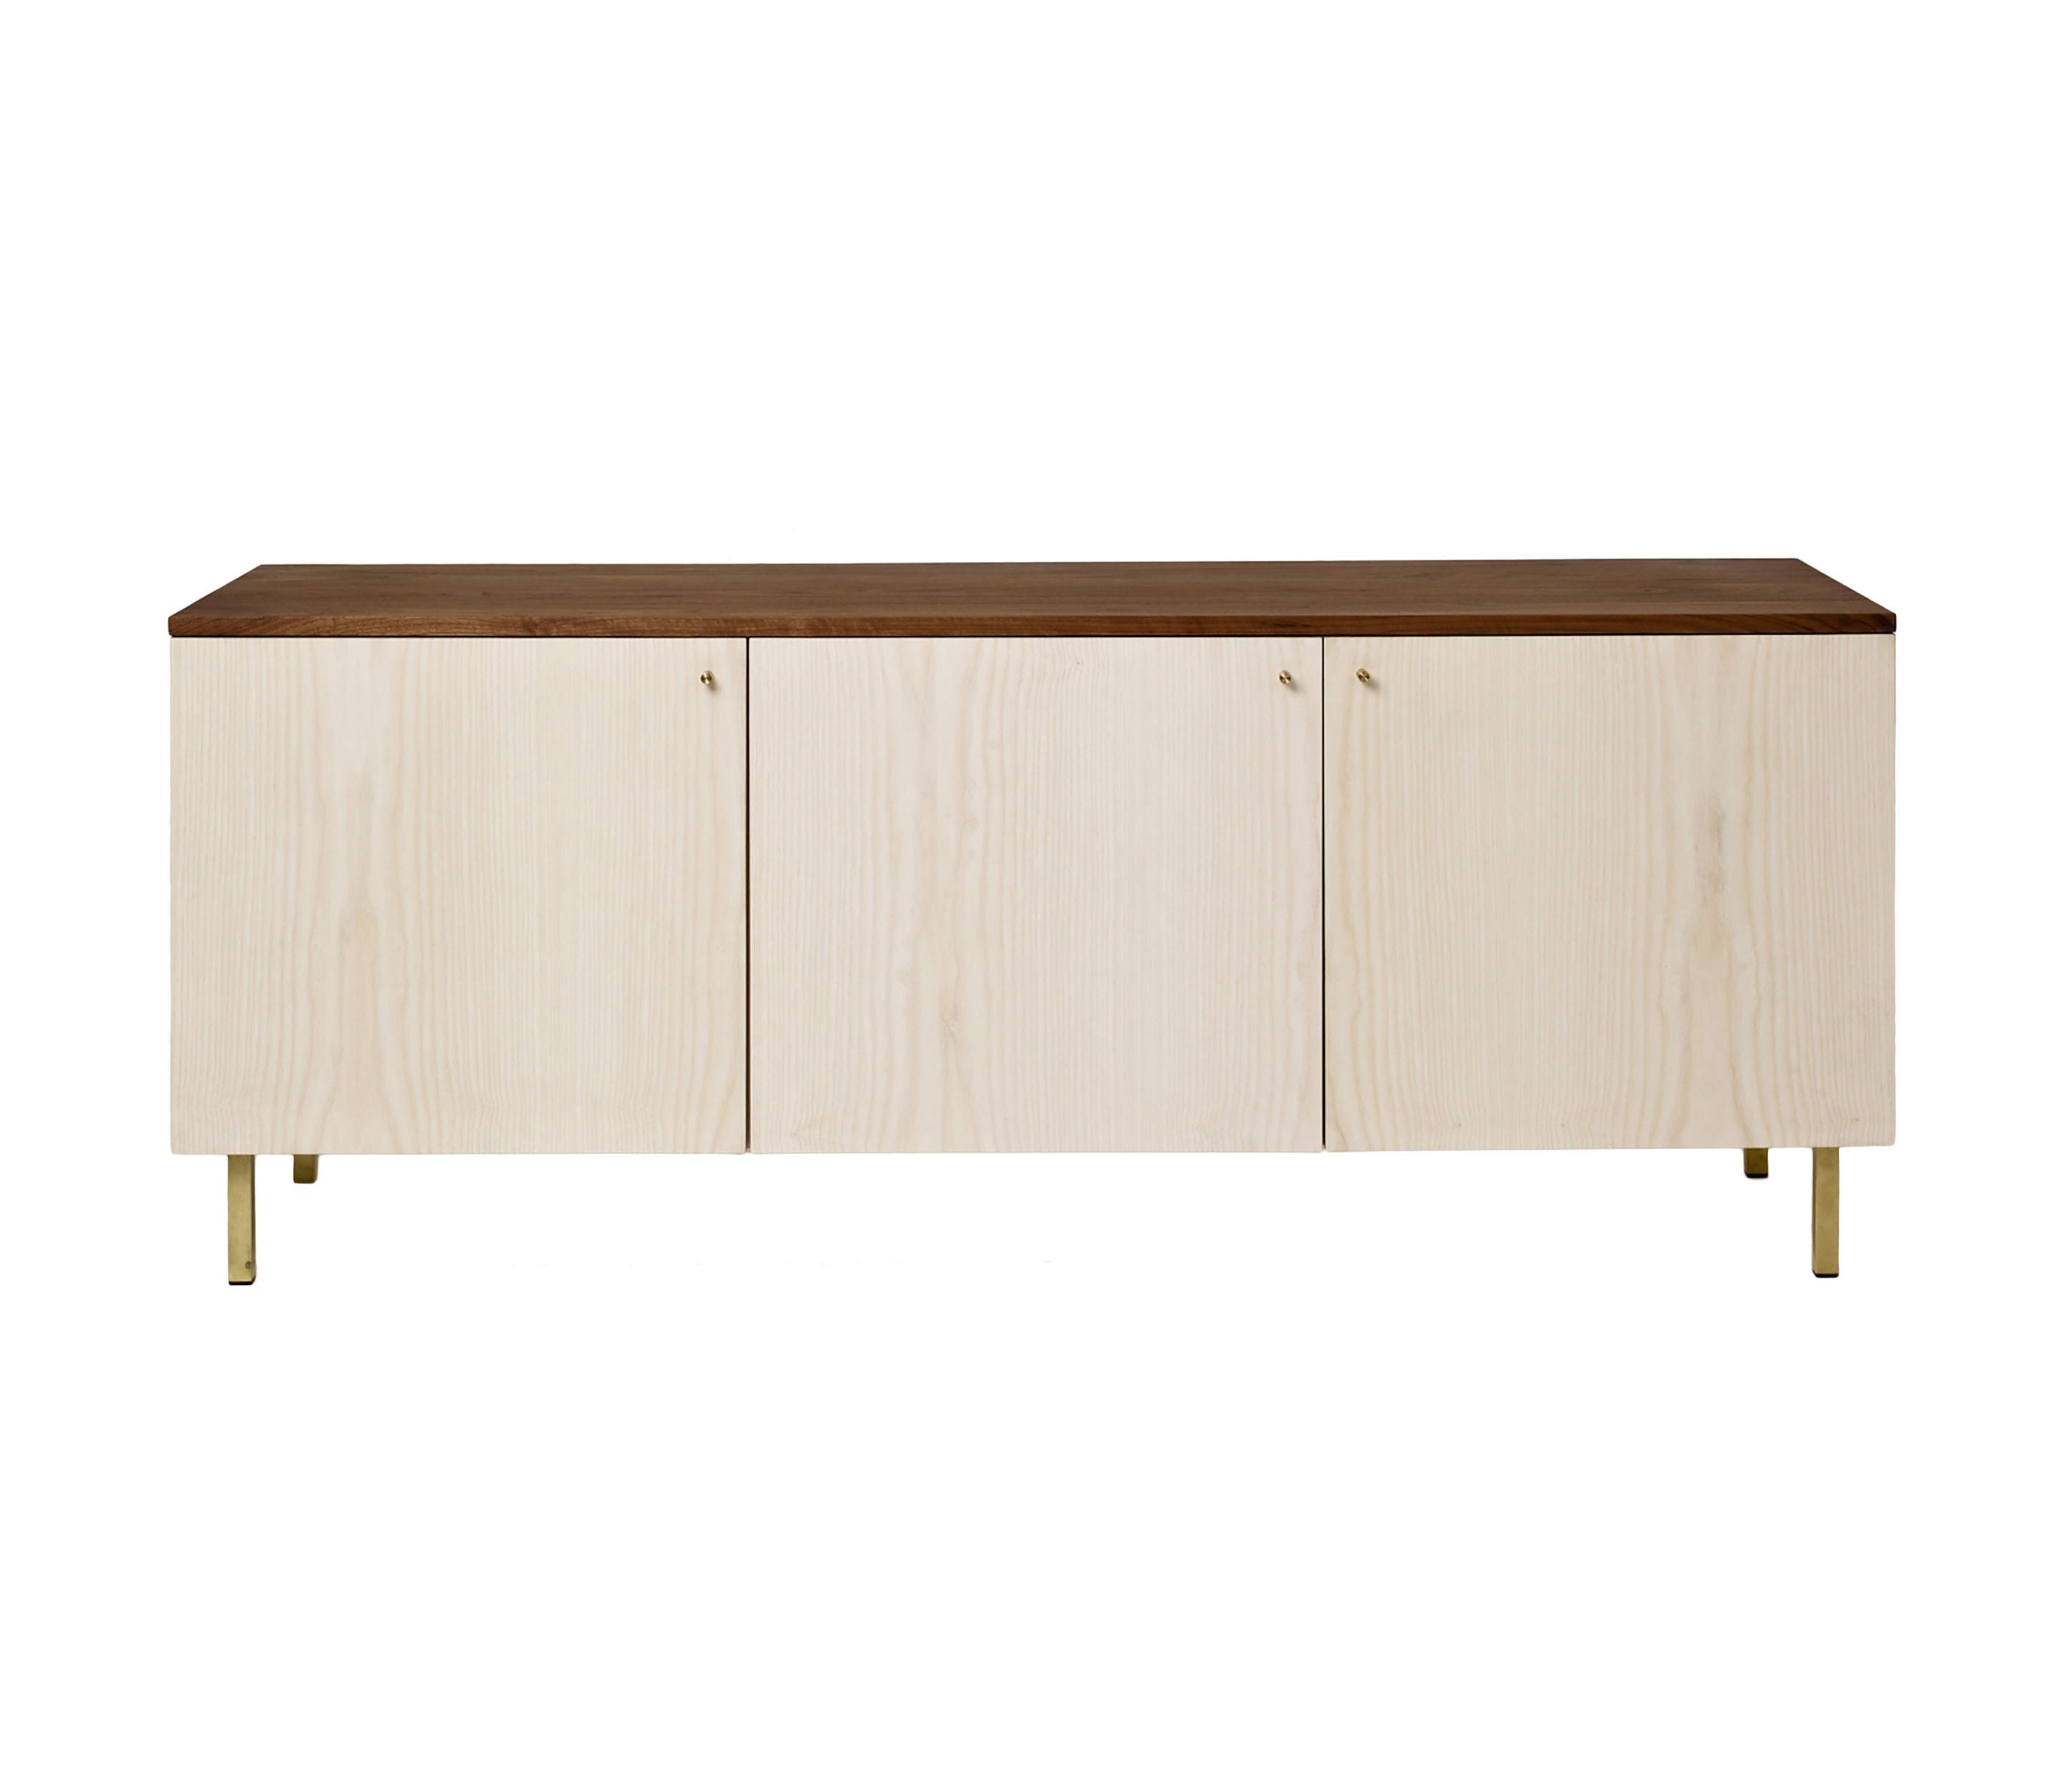 Widely Used Oil Pale Finish 3 Door Sideboards Inside Sideboard Two 3 Door – Ash & Walnut – Sideboards From Another (View 5 of 20)